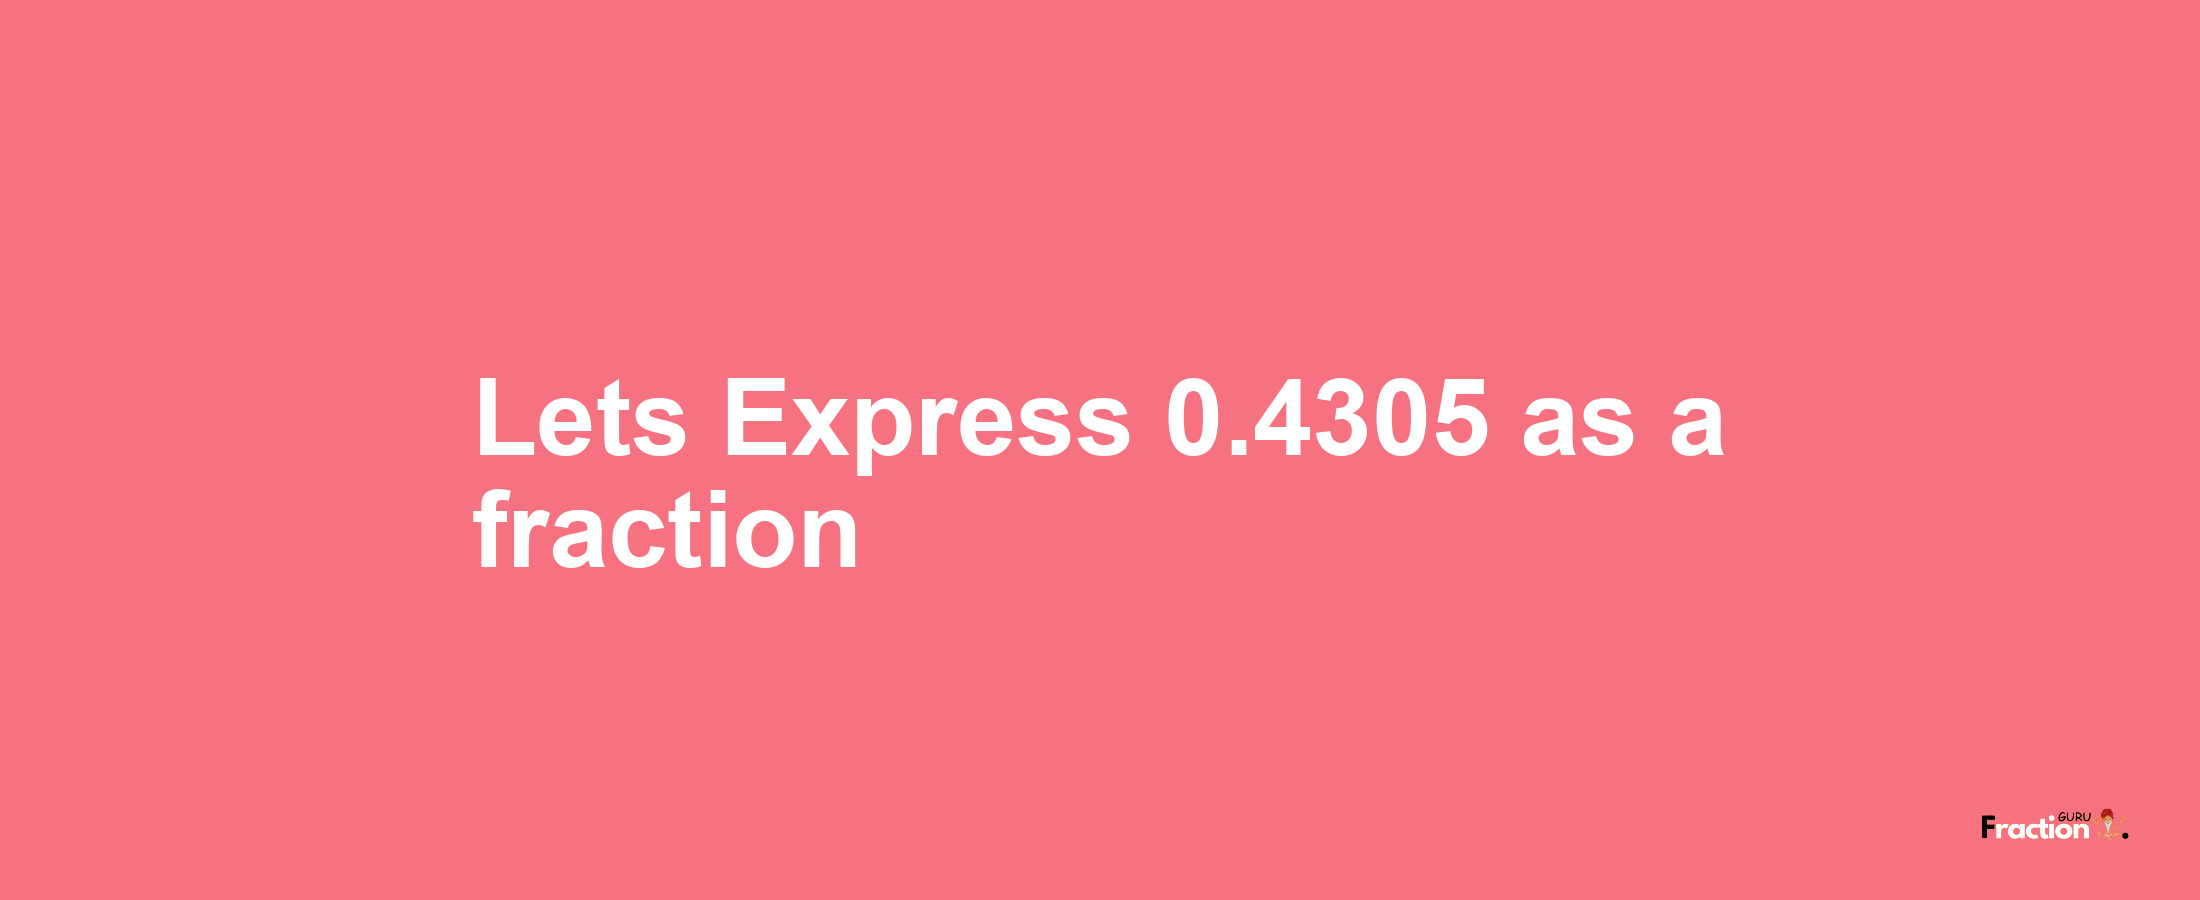 Lets Express 0.4305 as afraction